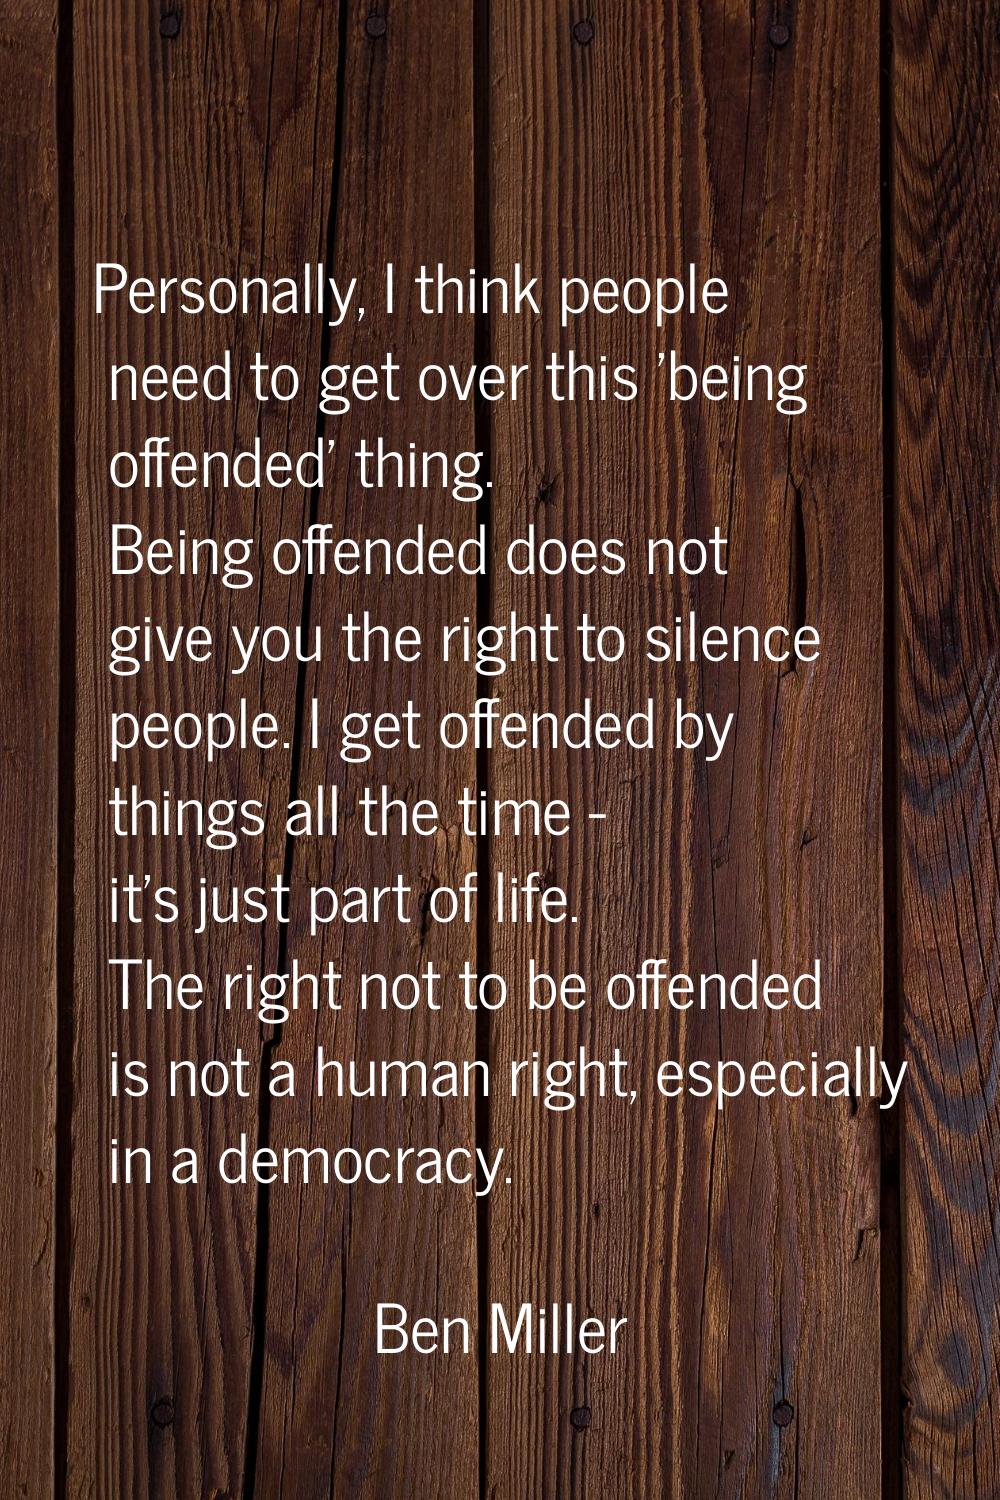 Personally, I think people need to get over this 'being offended' thing. Being offended does not gi